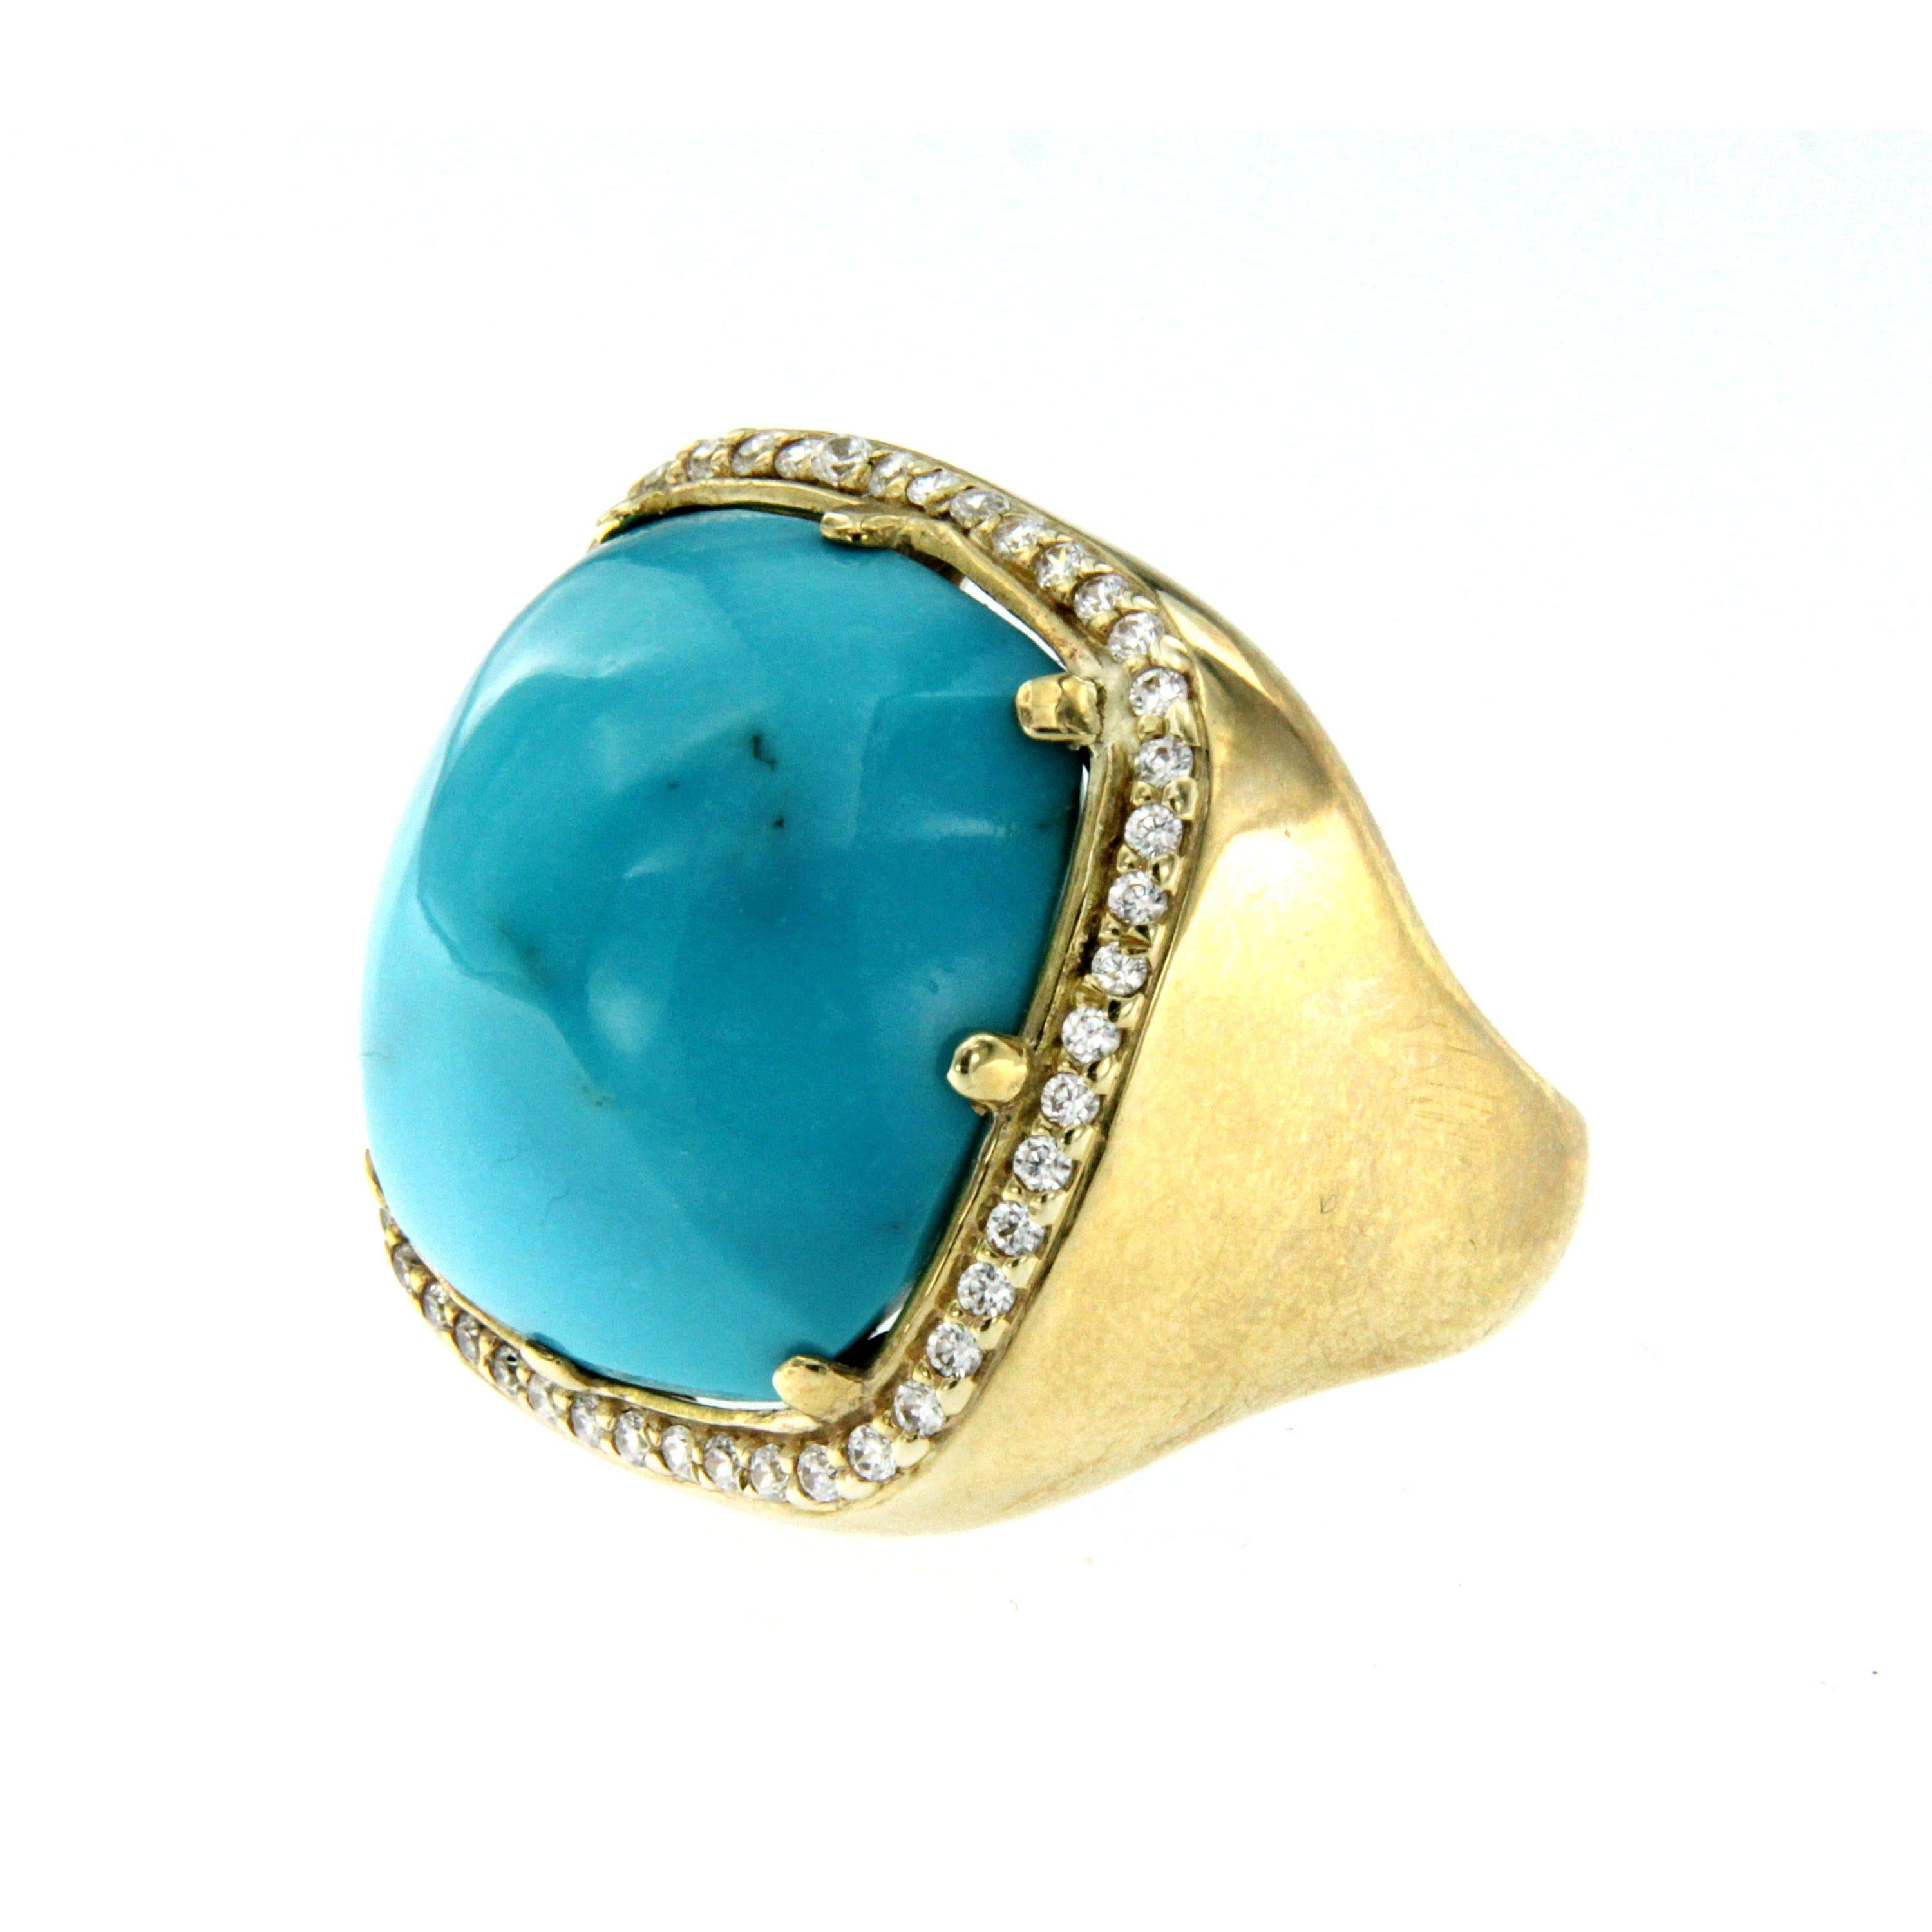 Beautiful ring out from 1980s origin Italy, hand-crafted of solid 9 Kt yellow gold.

The ring features a square cabochon turquoise paste, light blu color and surrounded by approx. 0,60 carat of colorless round brilliant cut diamonds graded G color